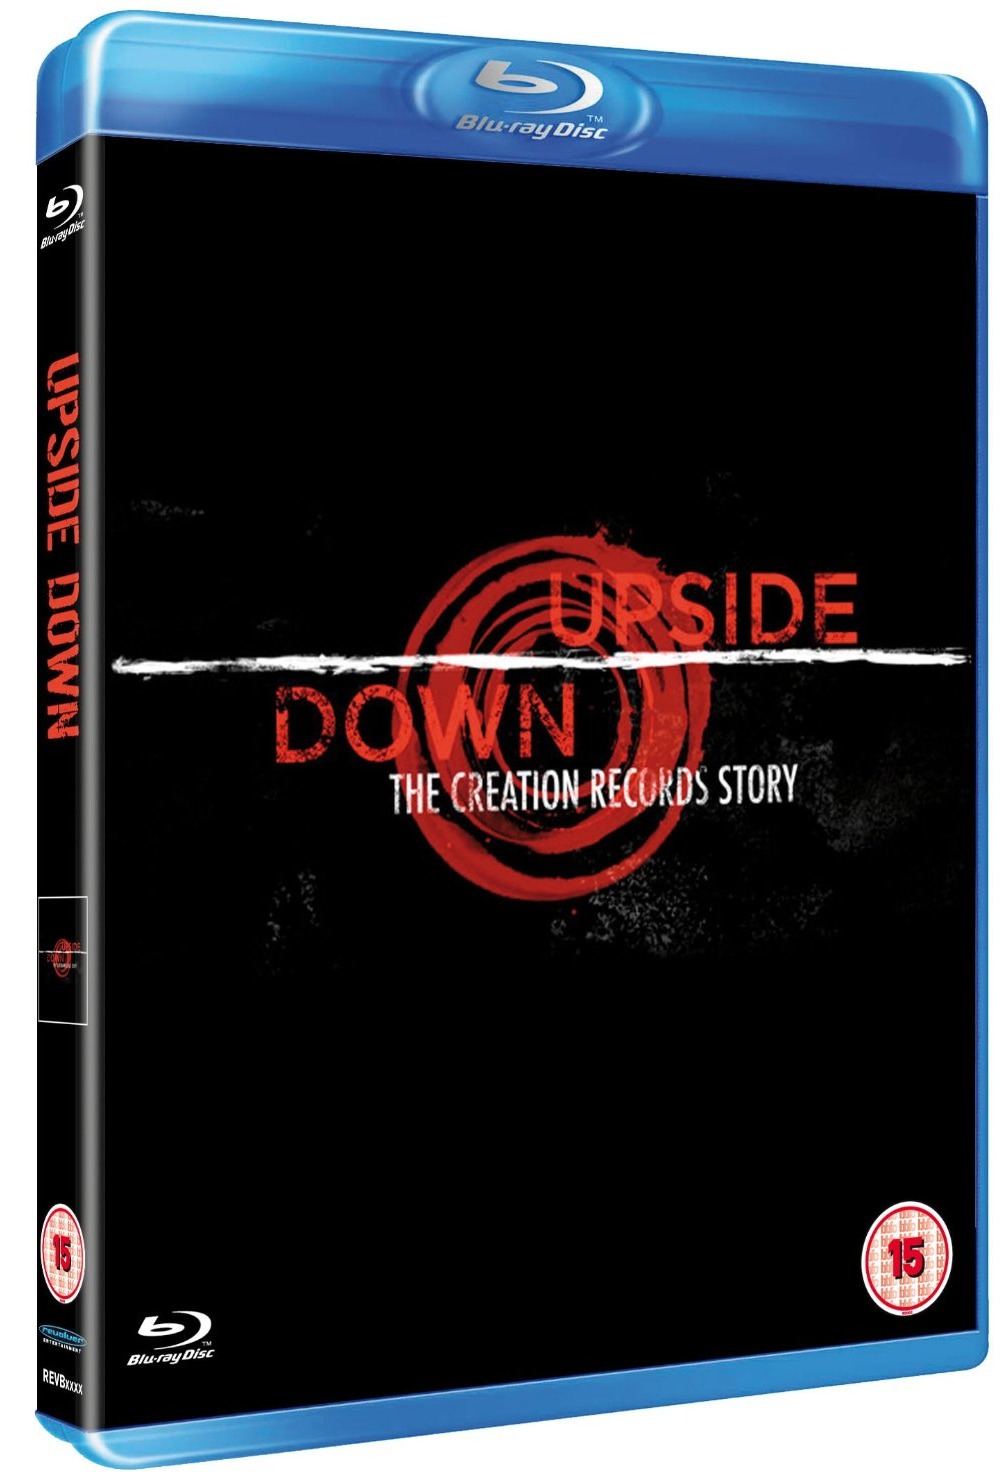 Trailer: ‘Upside Down: The Creation Records Story,’ out on DVD/Blu-ray in U.K. in May